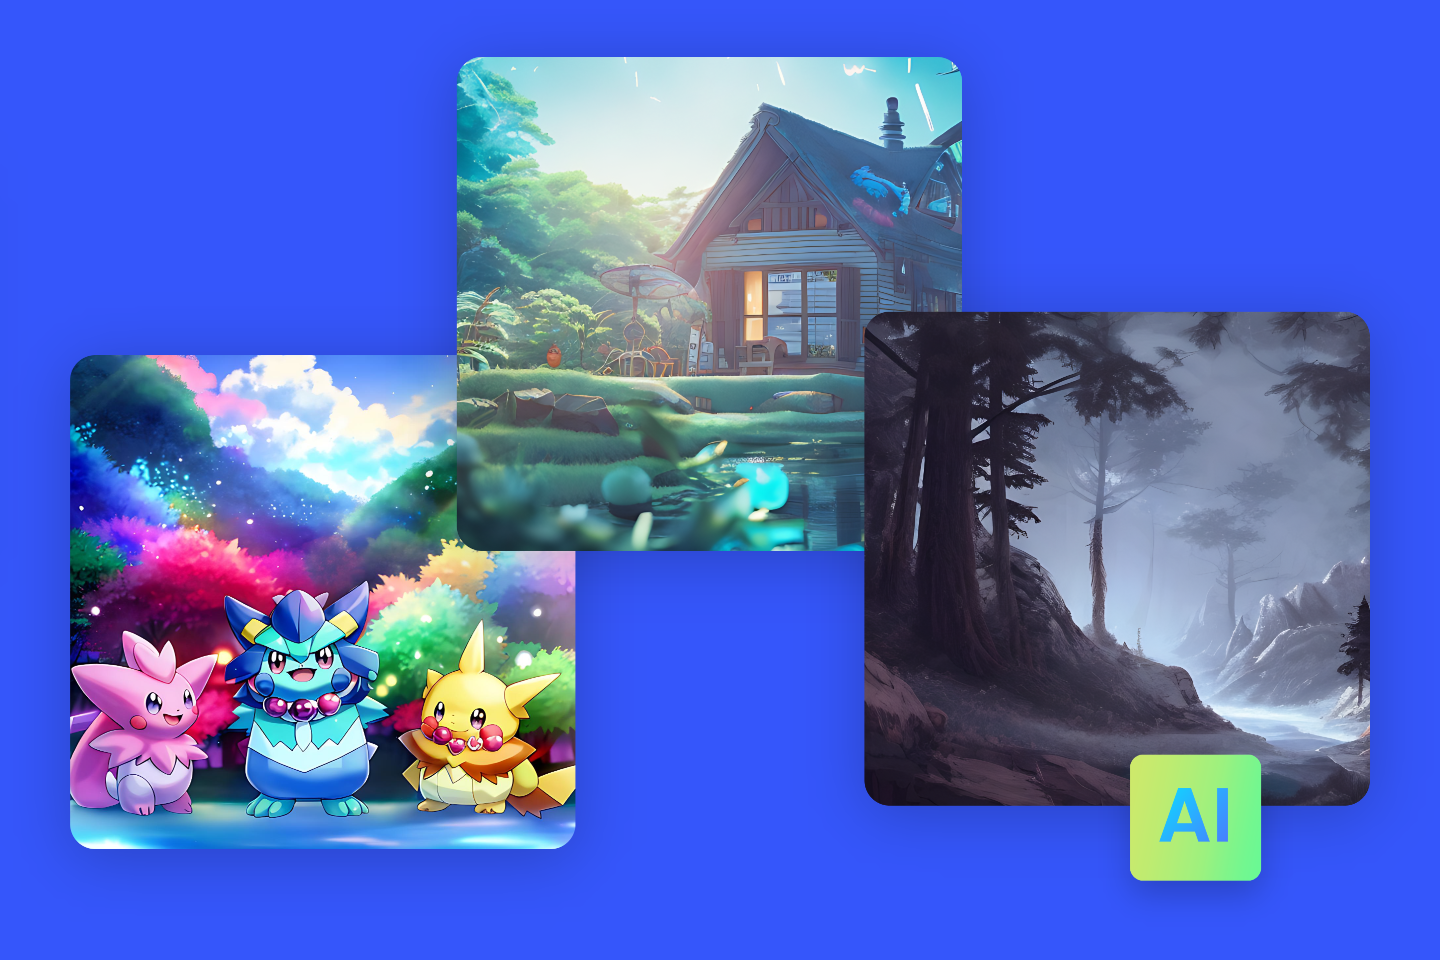 Pokemon forest and canbin ai drawings from fotor ai image generator